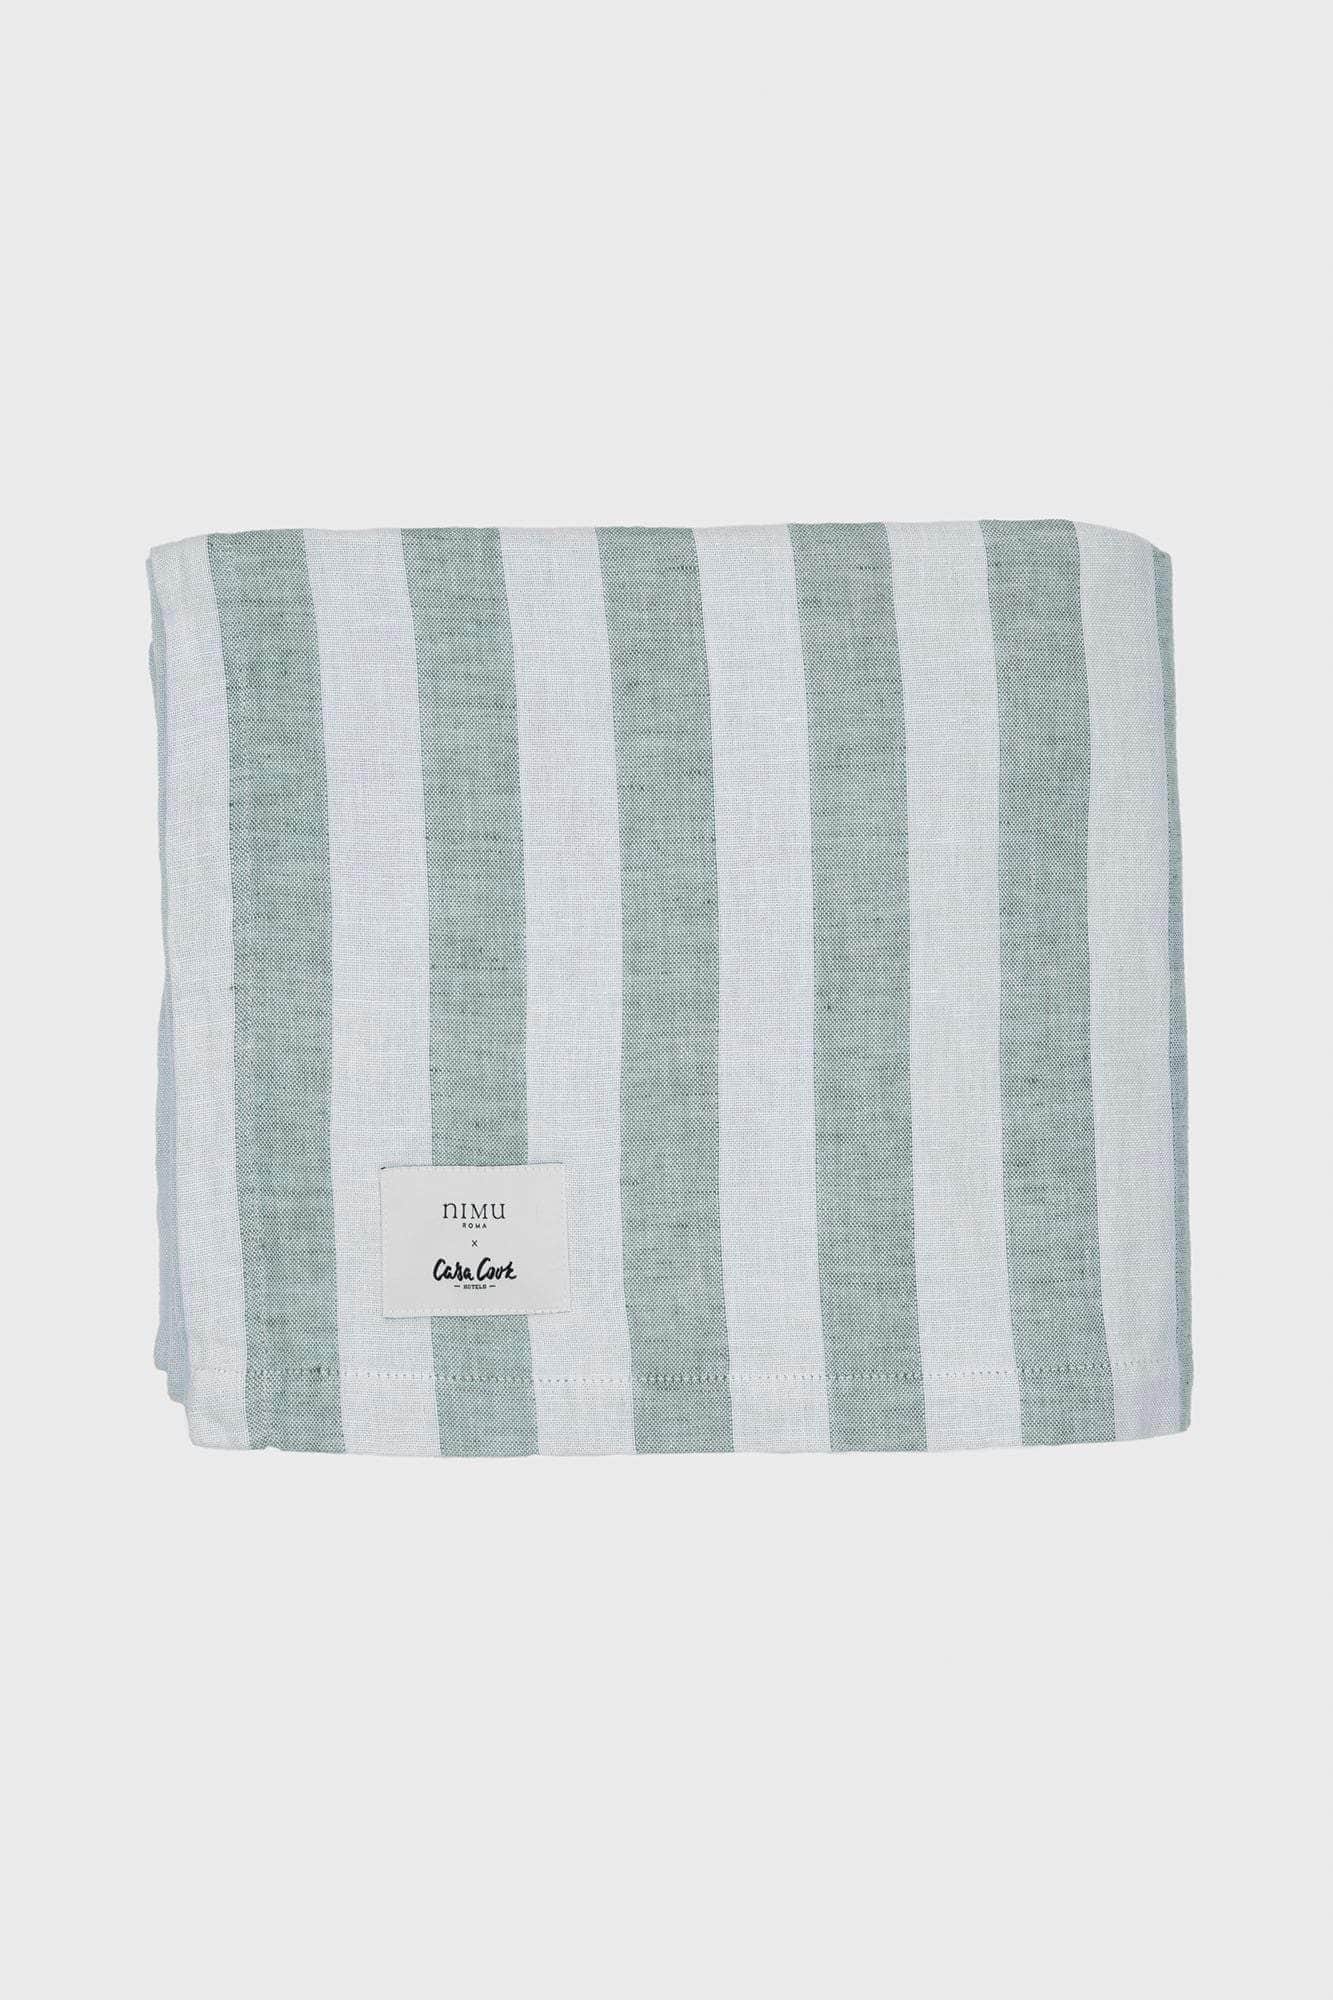 Casa Cook- Limited Edition Towel